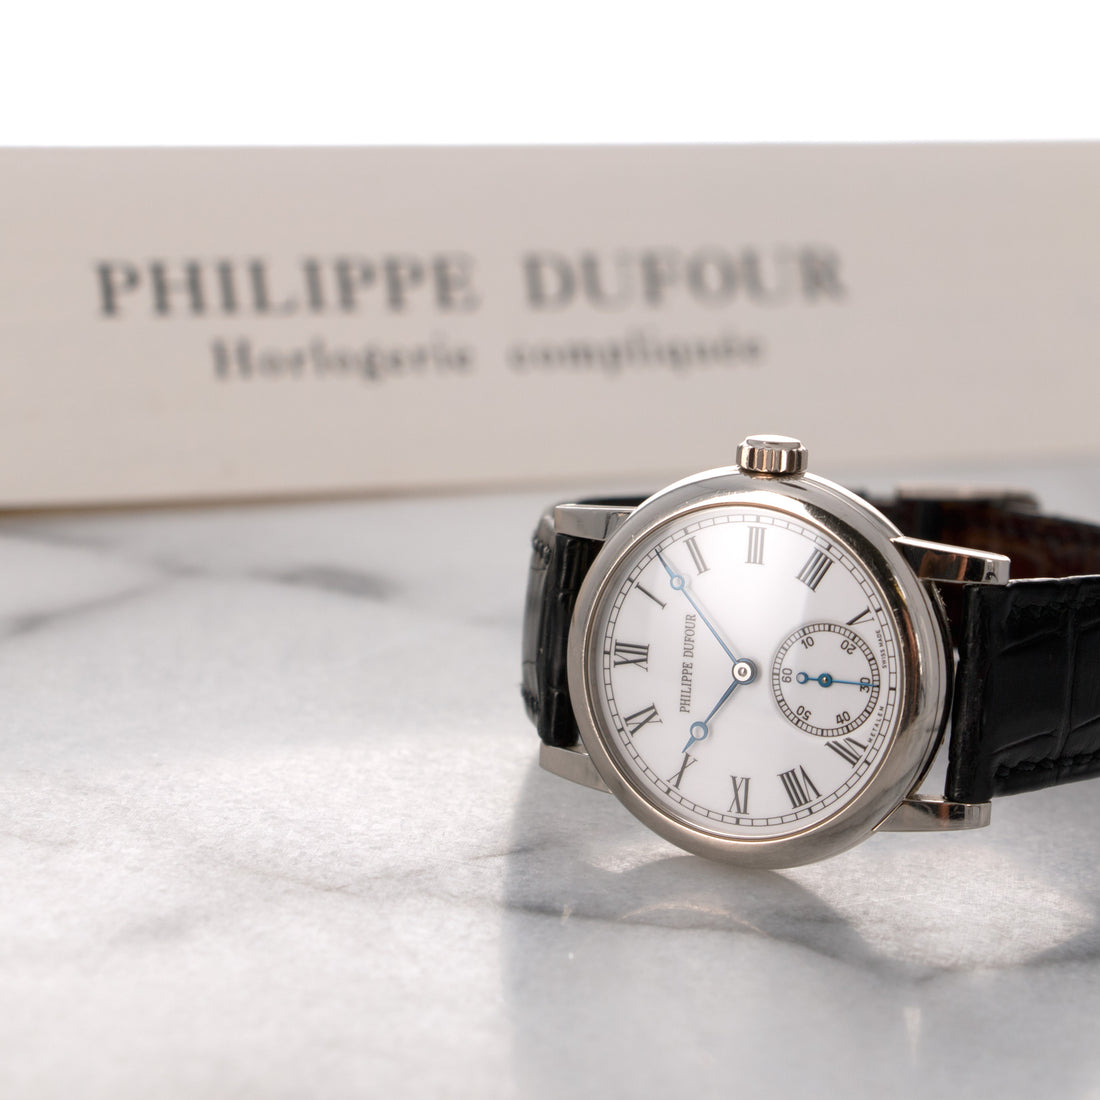 Philippe Dufour White Gold Simplicity Watch, with Original Box and Papers